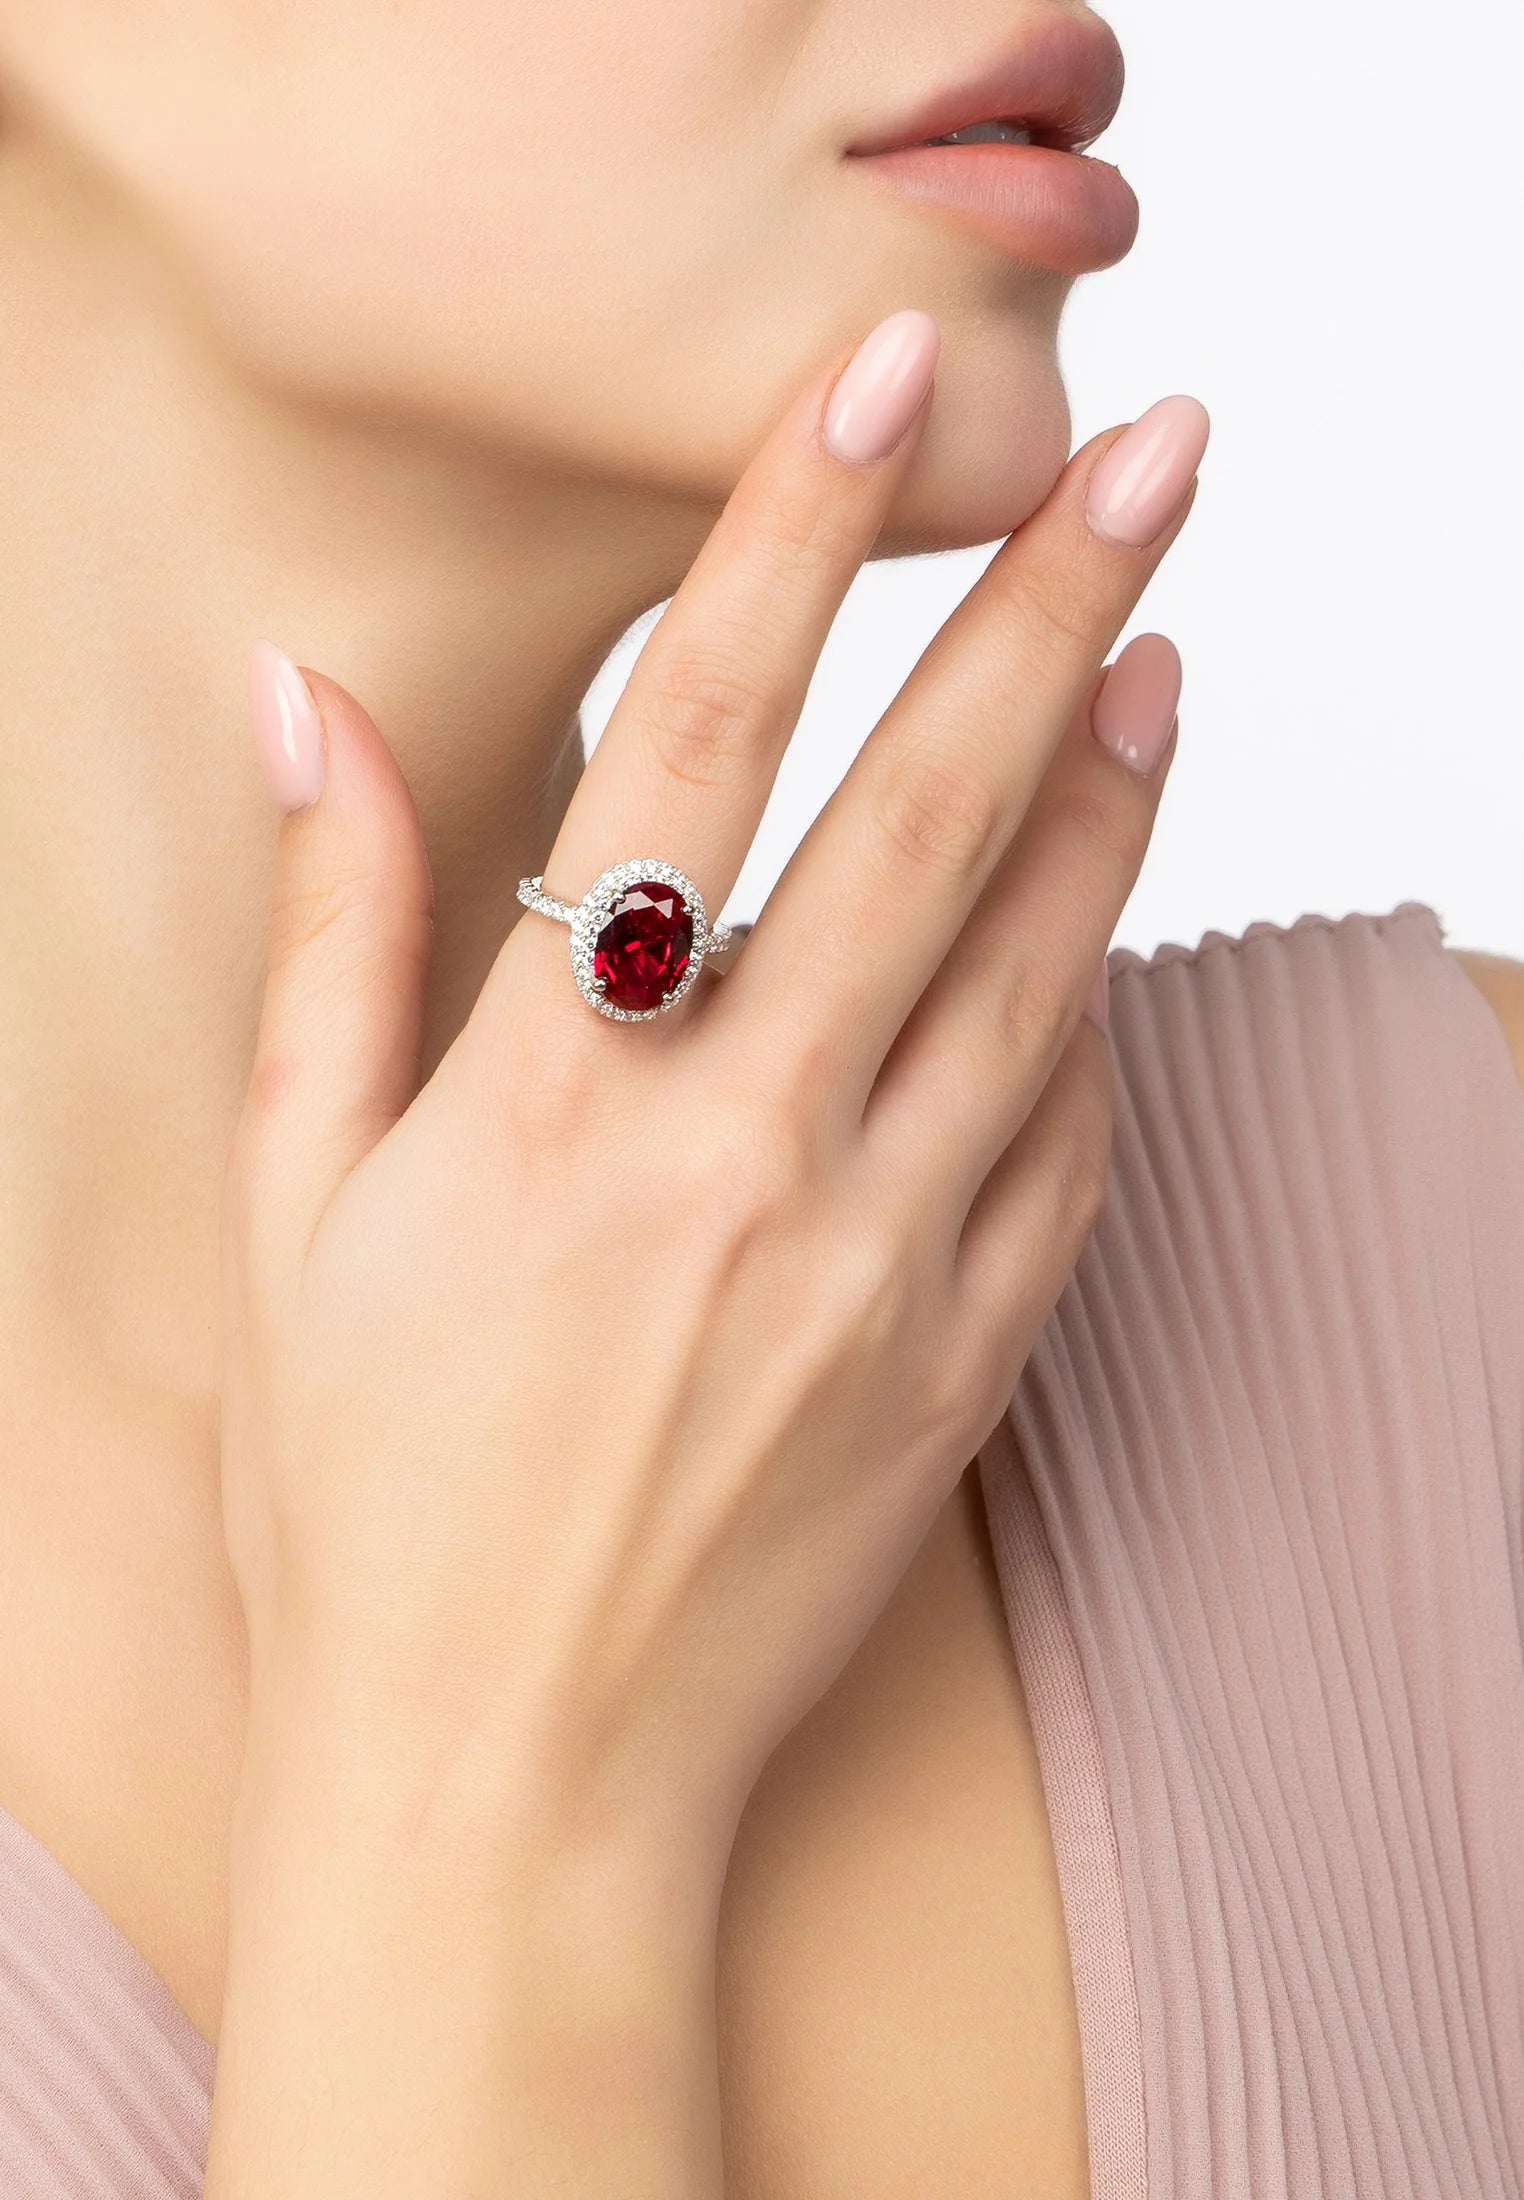 9 Gemstone Ring Designs We're Obsessed With